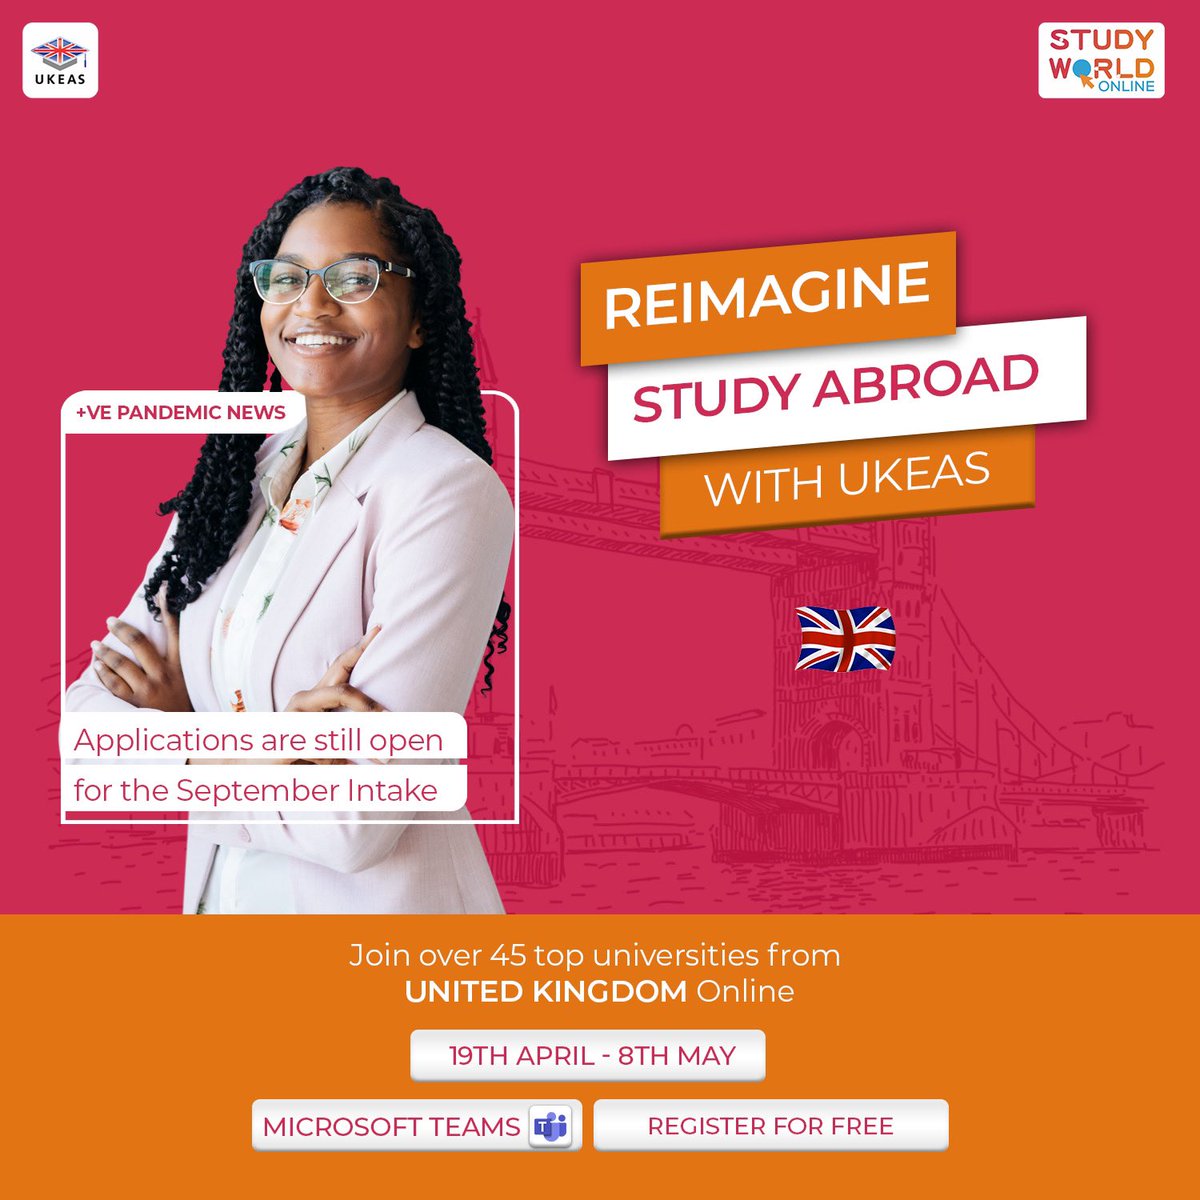 Ad breakGet access to over 45 Uk top universities in this FREE webinar chat by  @ukeasnaija starting on the 19th of April to the 8th of May 2021.Link: http://ukeas.com/smallie Tuition fees start from 12k pounds.